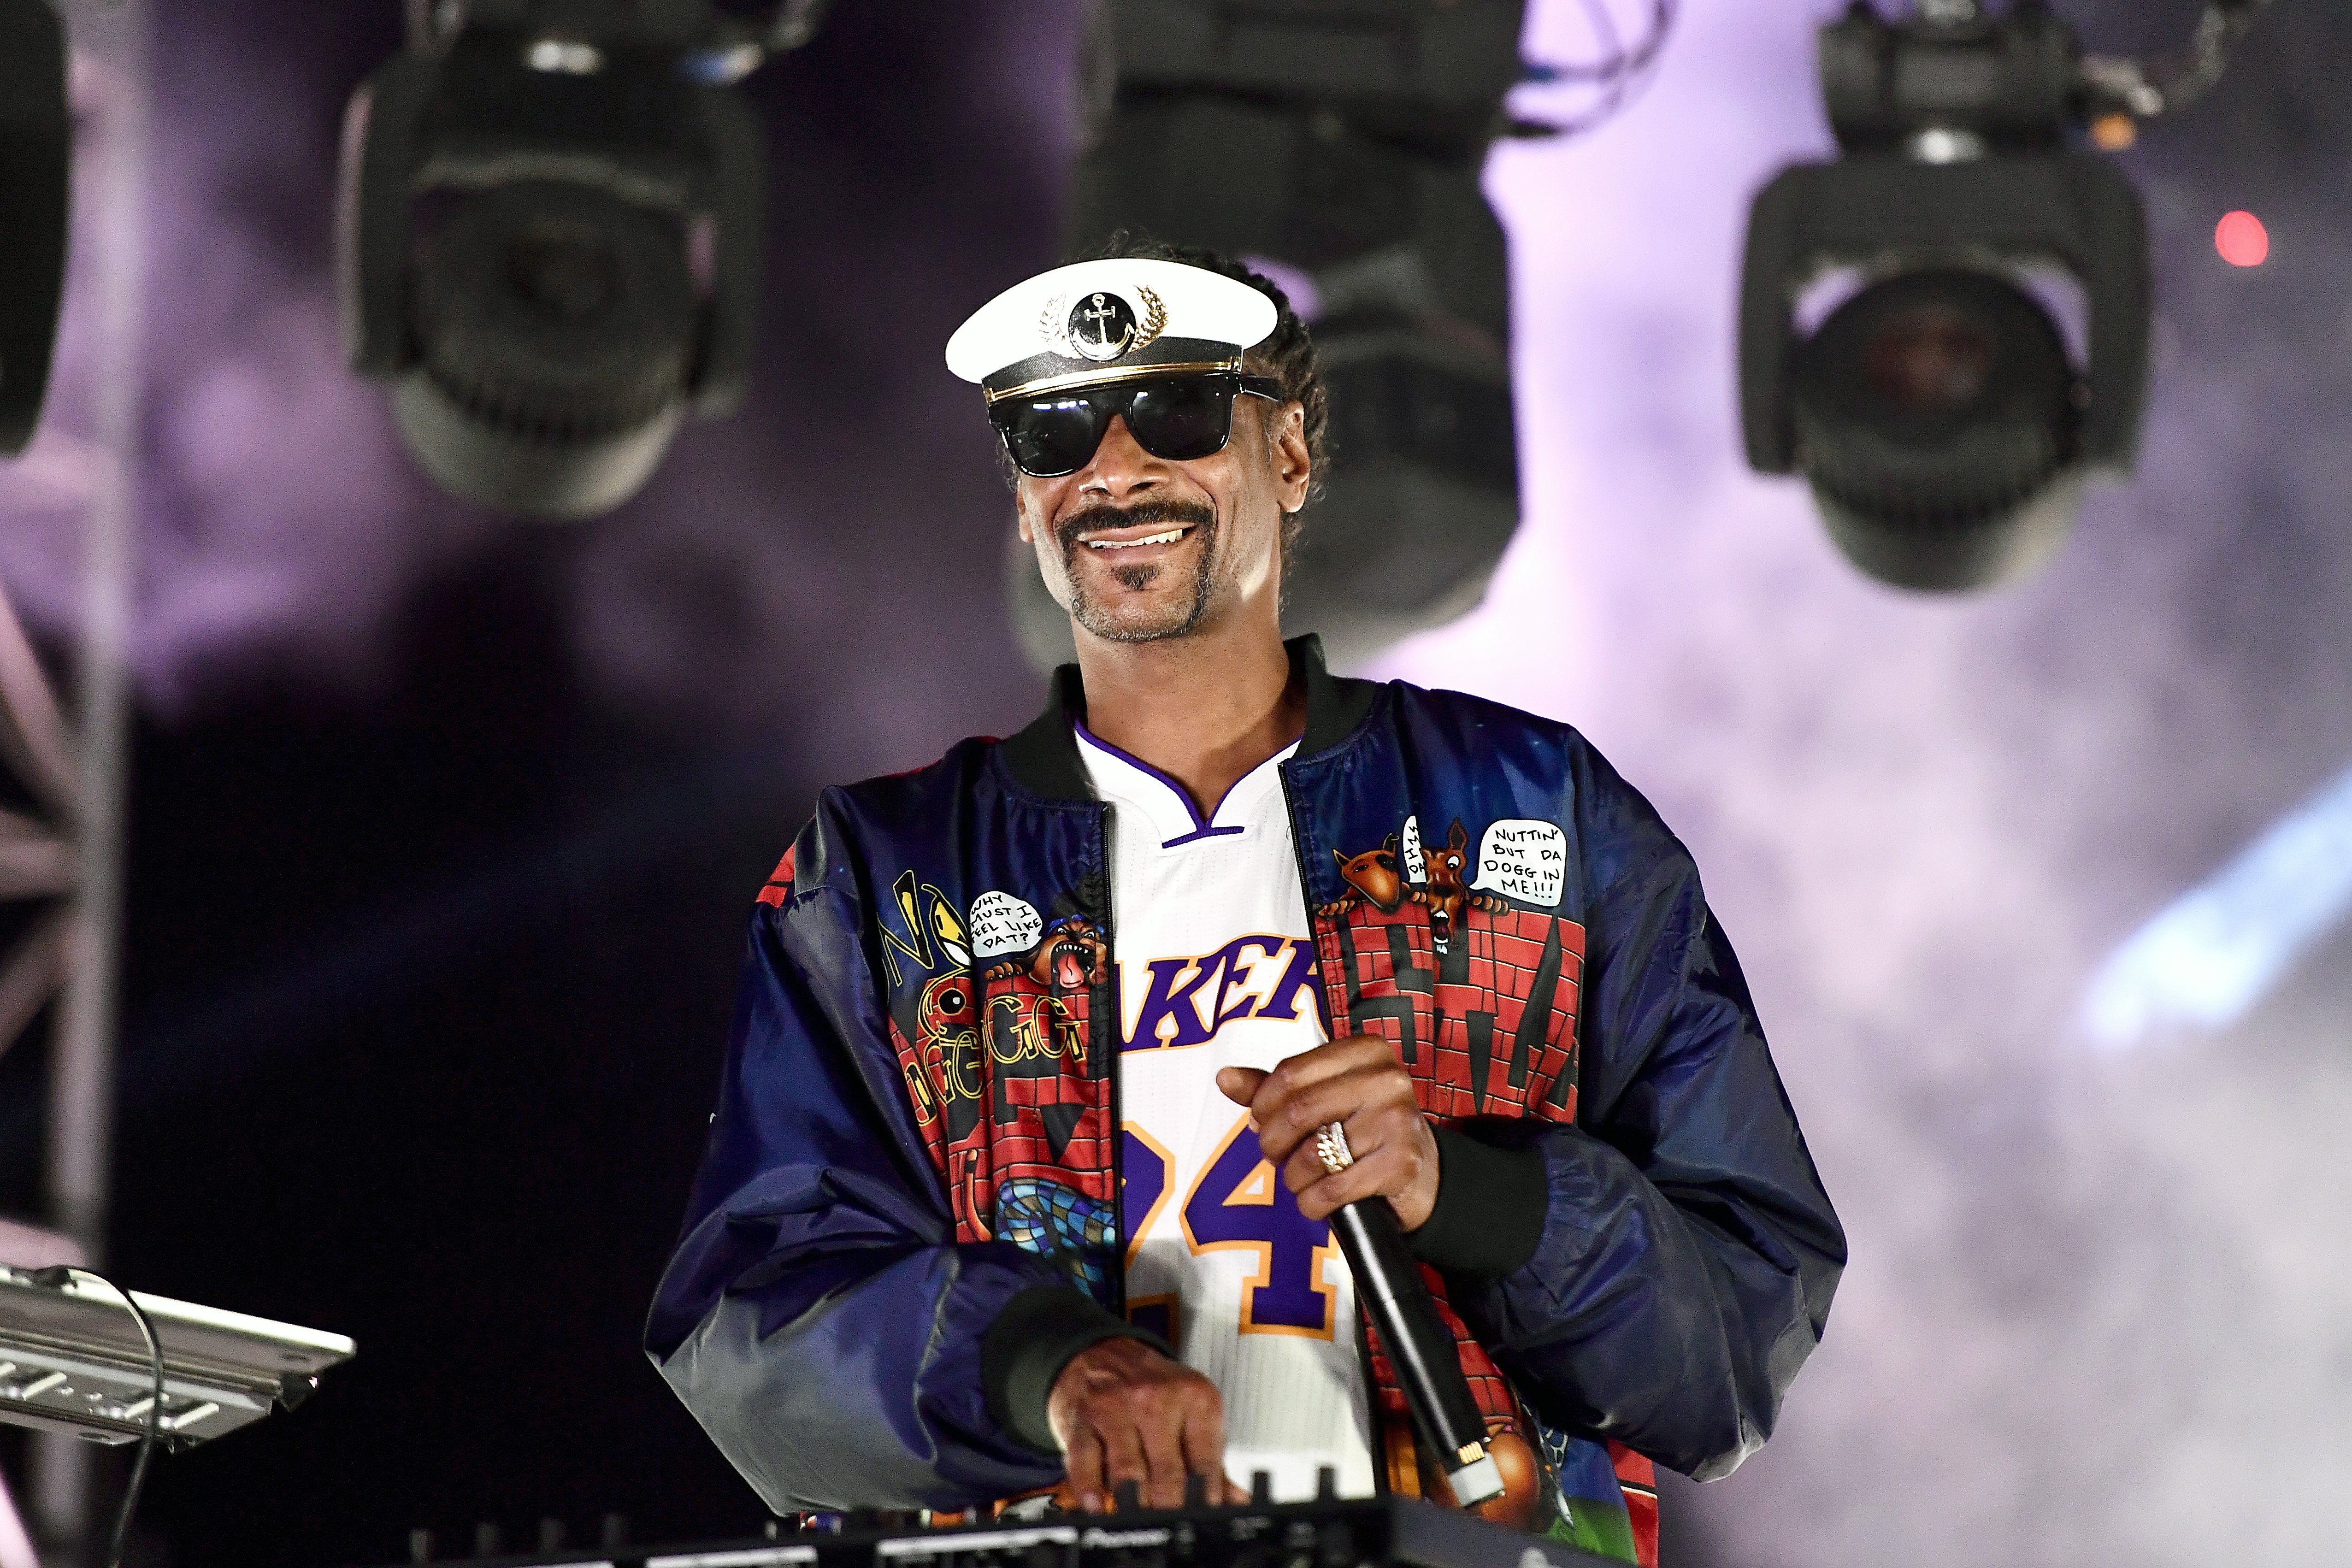 Snoop Dogg using the stage name DJ Snoopadelic at the "Concerts in Your Car's" drive-in concert at Ventura County Fairgrounds and Event Center on October 02, 2020 in Ventura, California.| Source: Getty Images